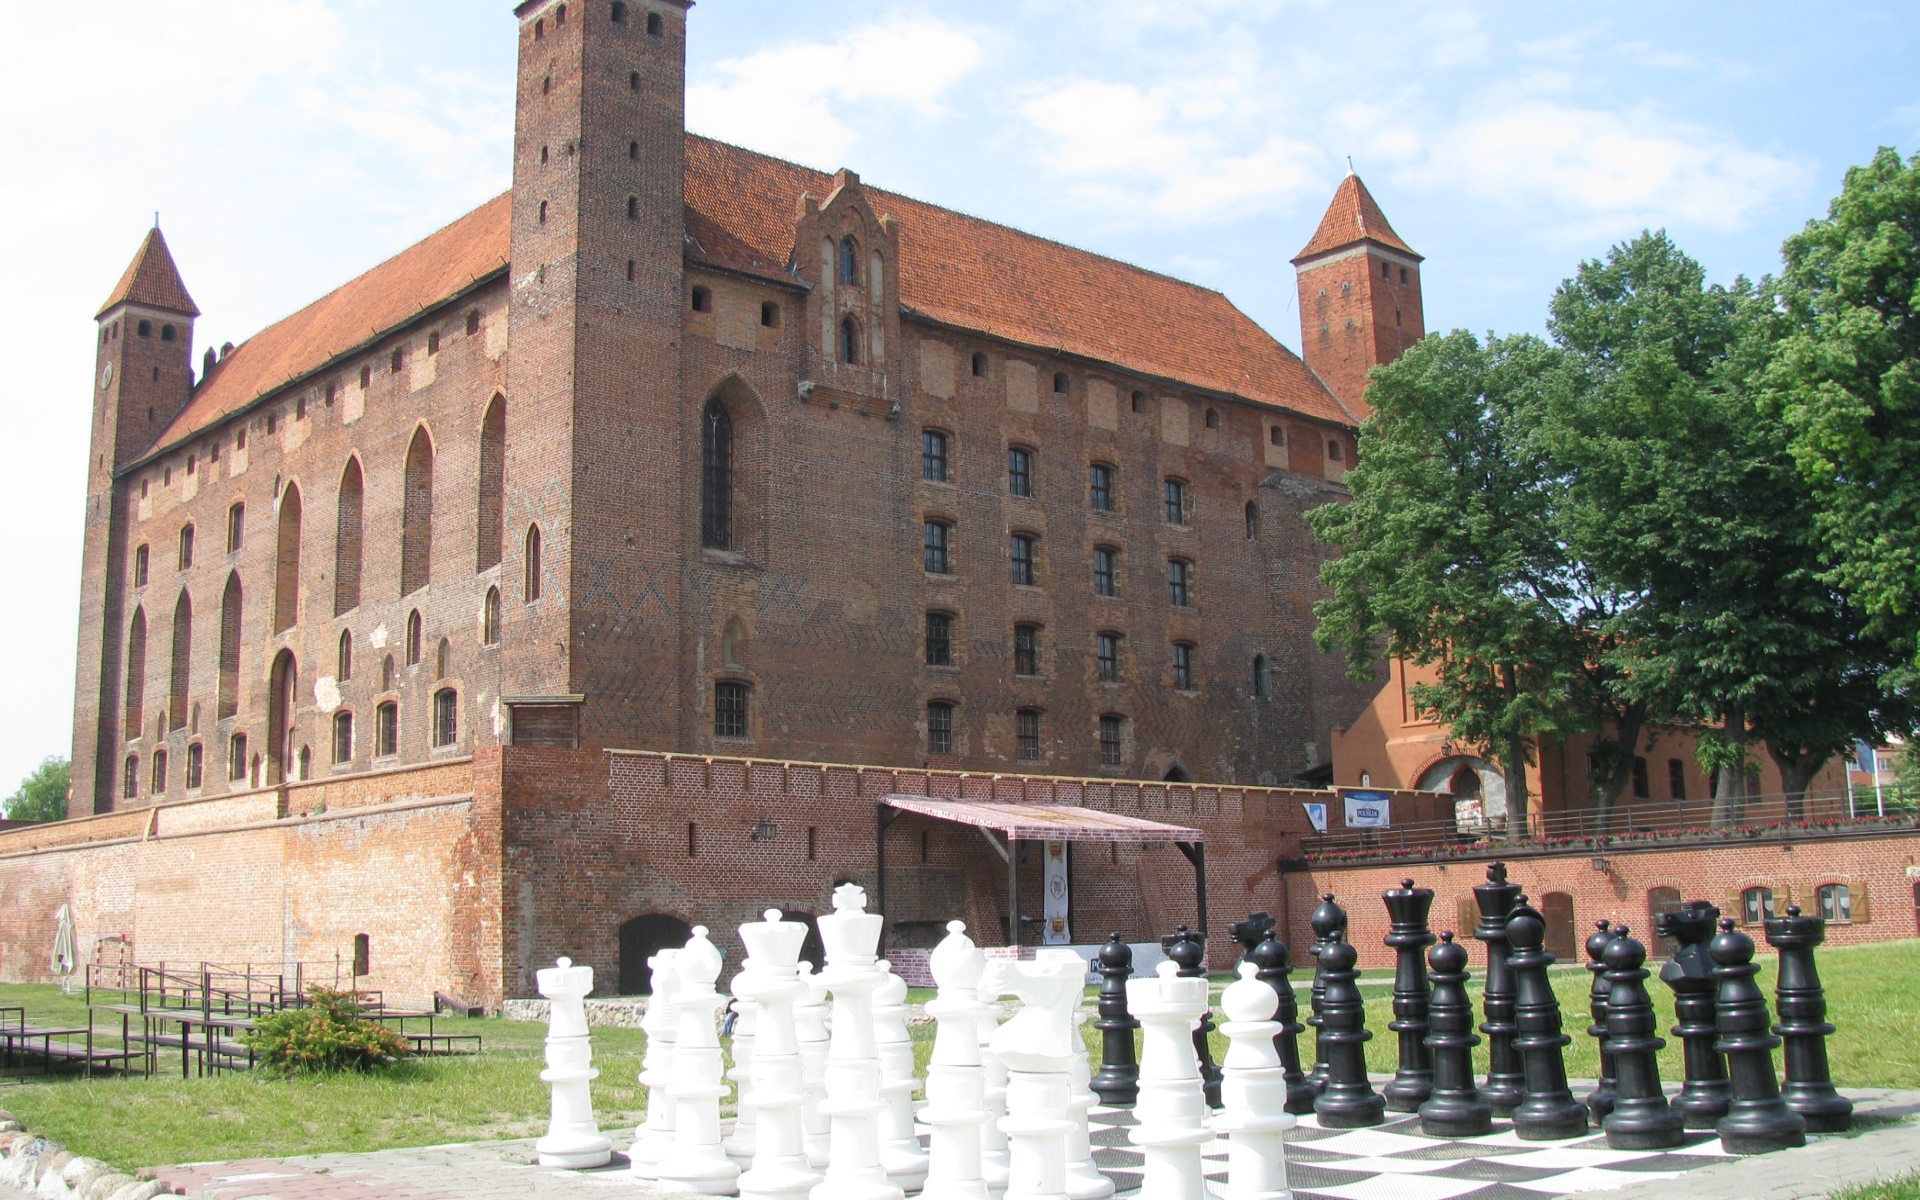 Man Made Gniew Castle 1920x1200